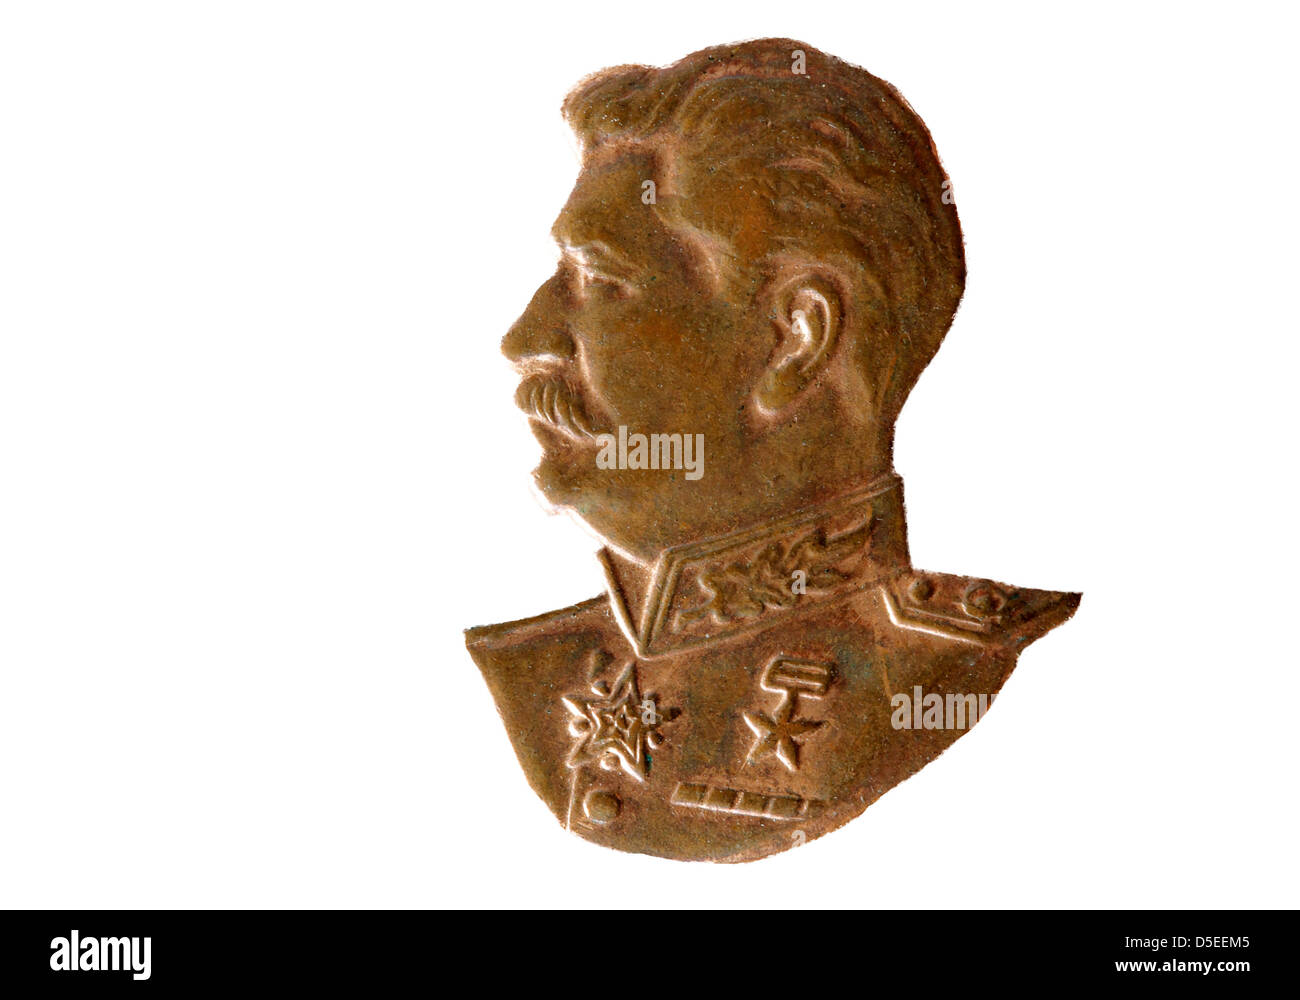 Portrait of Joseph Stalin from Soviet medal For Valiant Labour, Russia, 1945, on white background Stock Photo